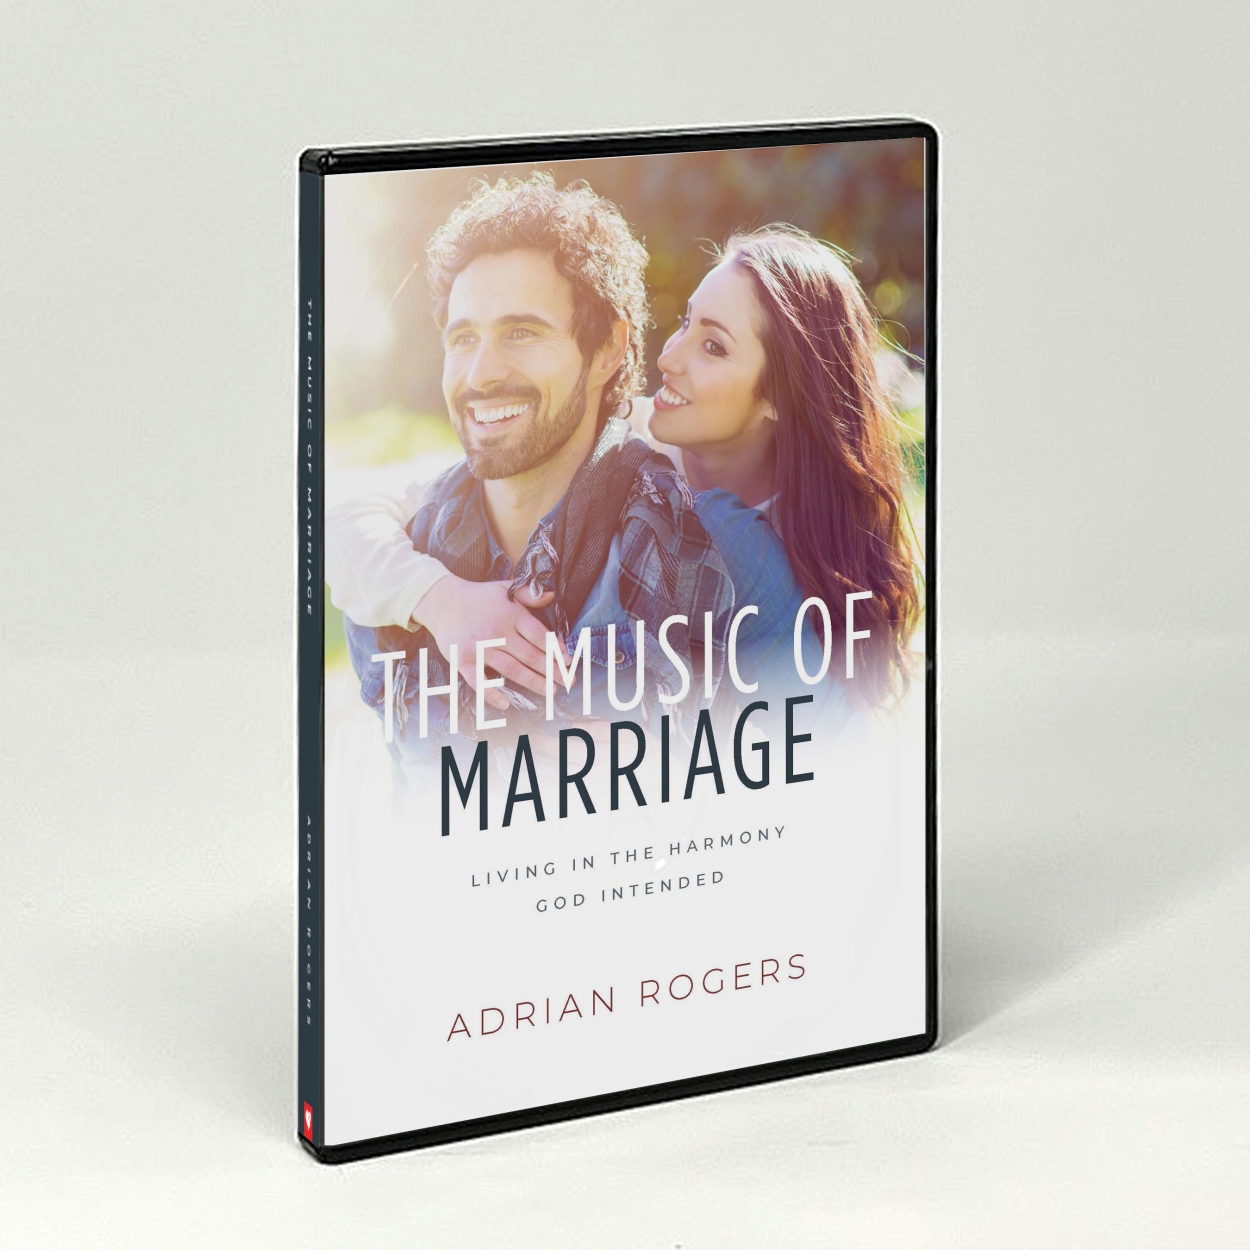 Cda133 the music of marriage STORE GRID